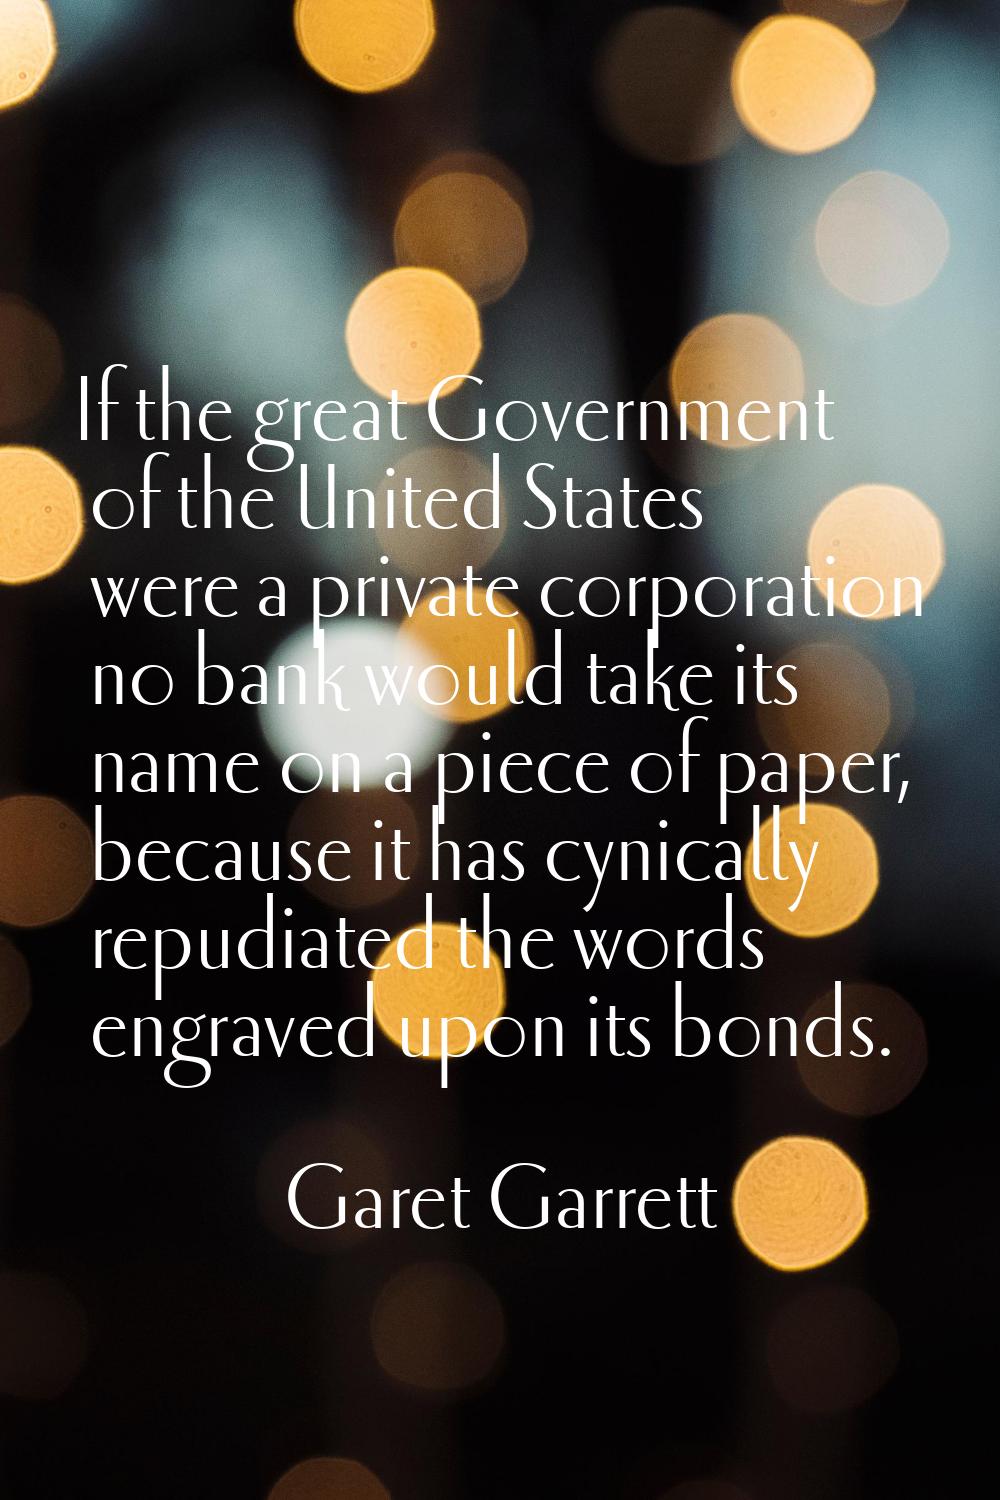 If the great Government of the United States were a private corporation no bank would take its name